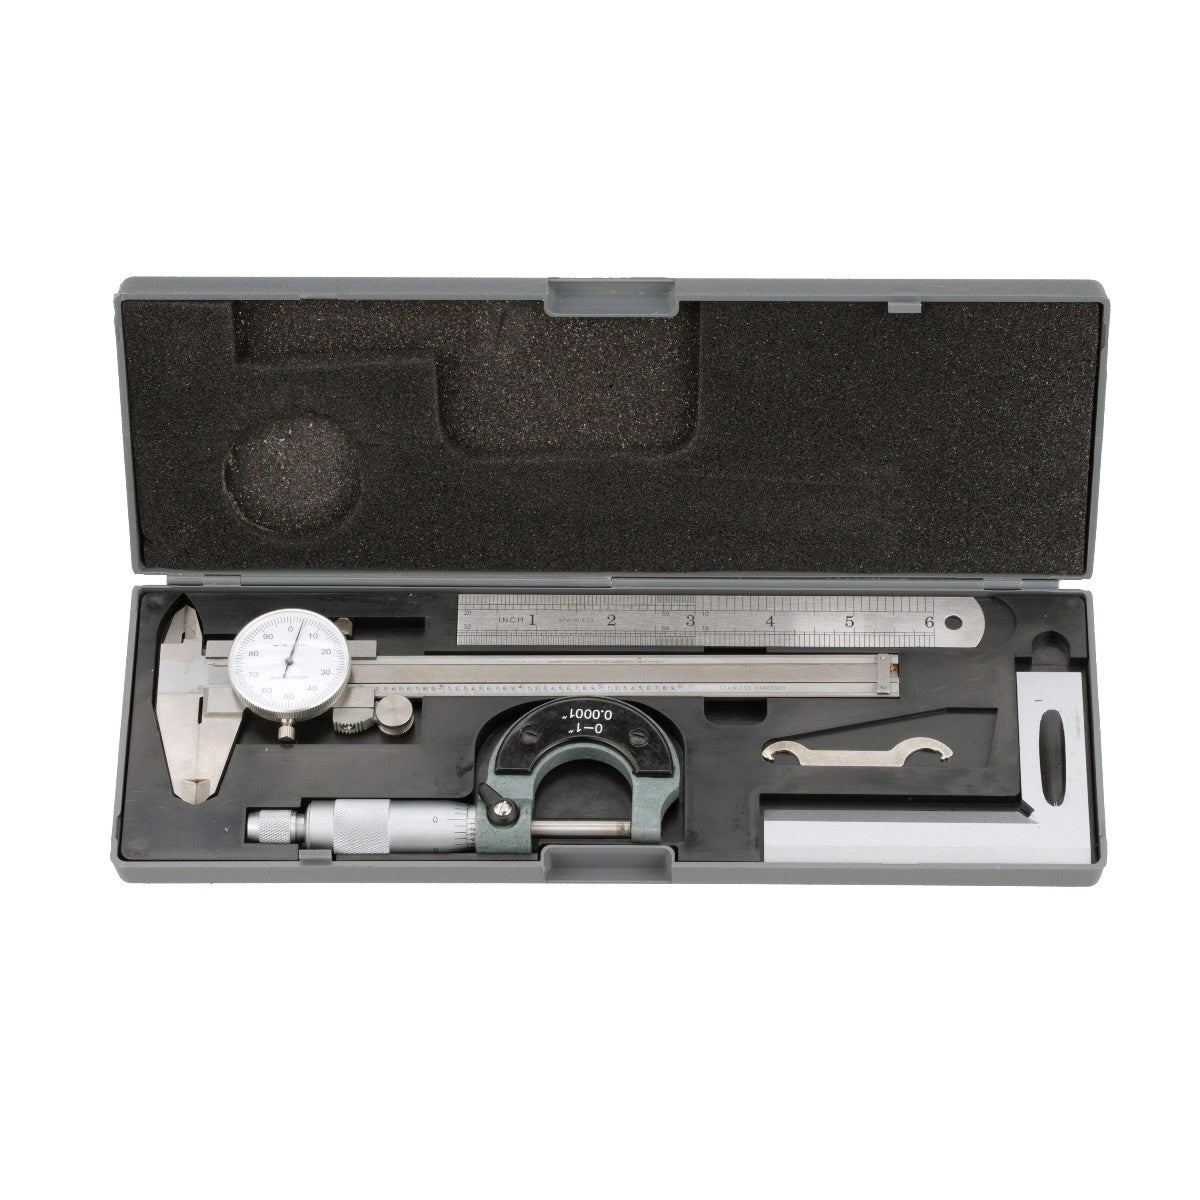 4 PIECE MACHINIST'S / STUDENT'S KIT WITH 6" DIAL CALIPER